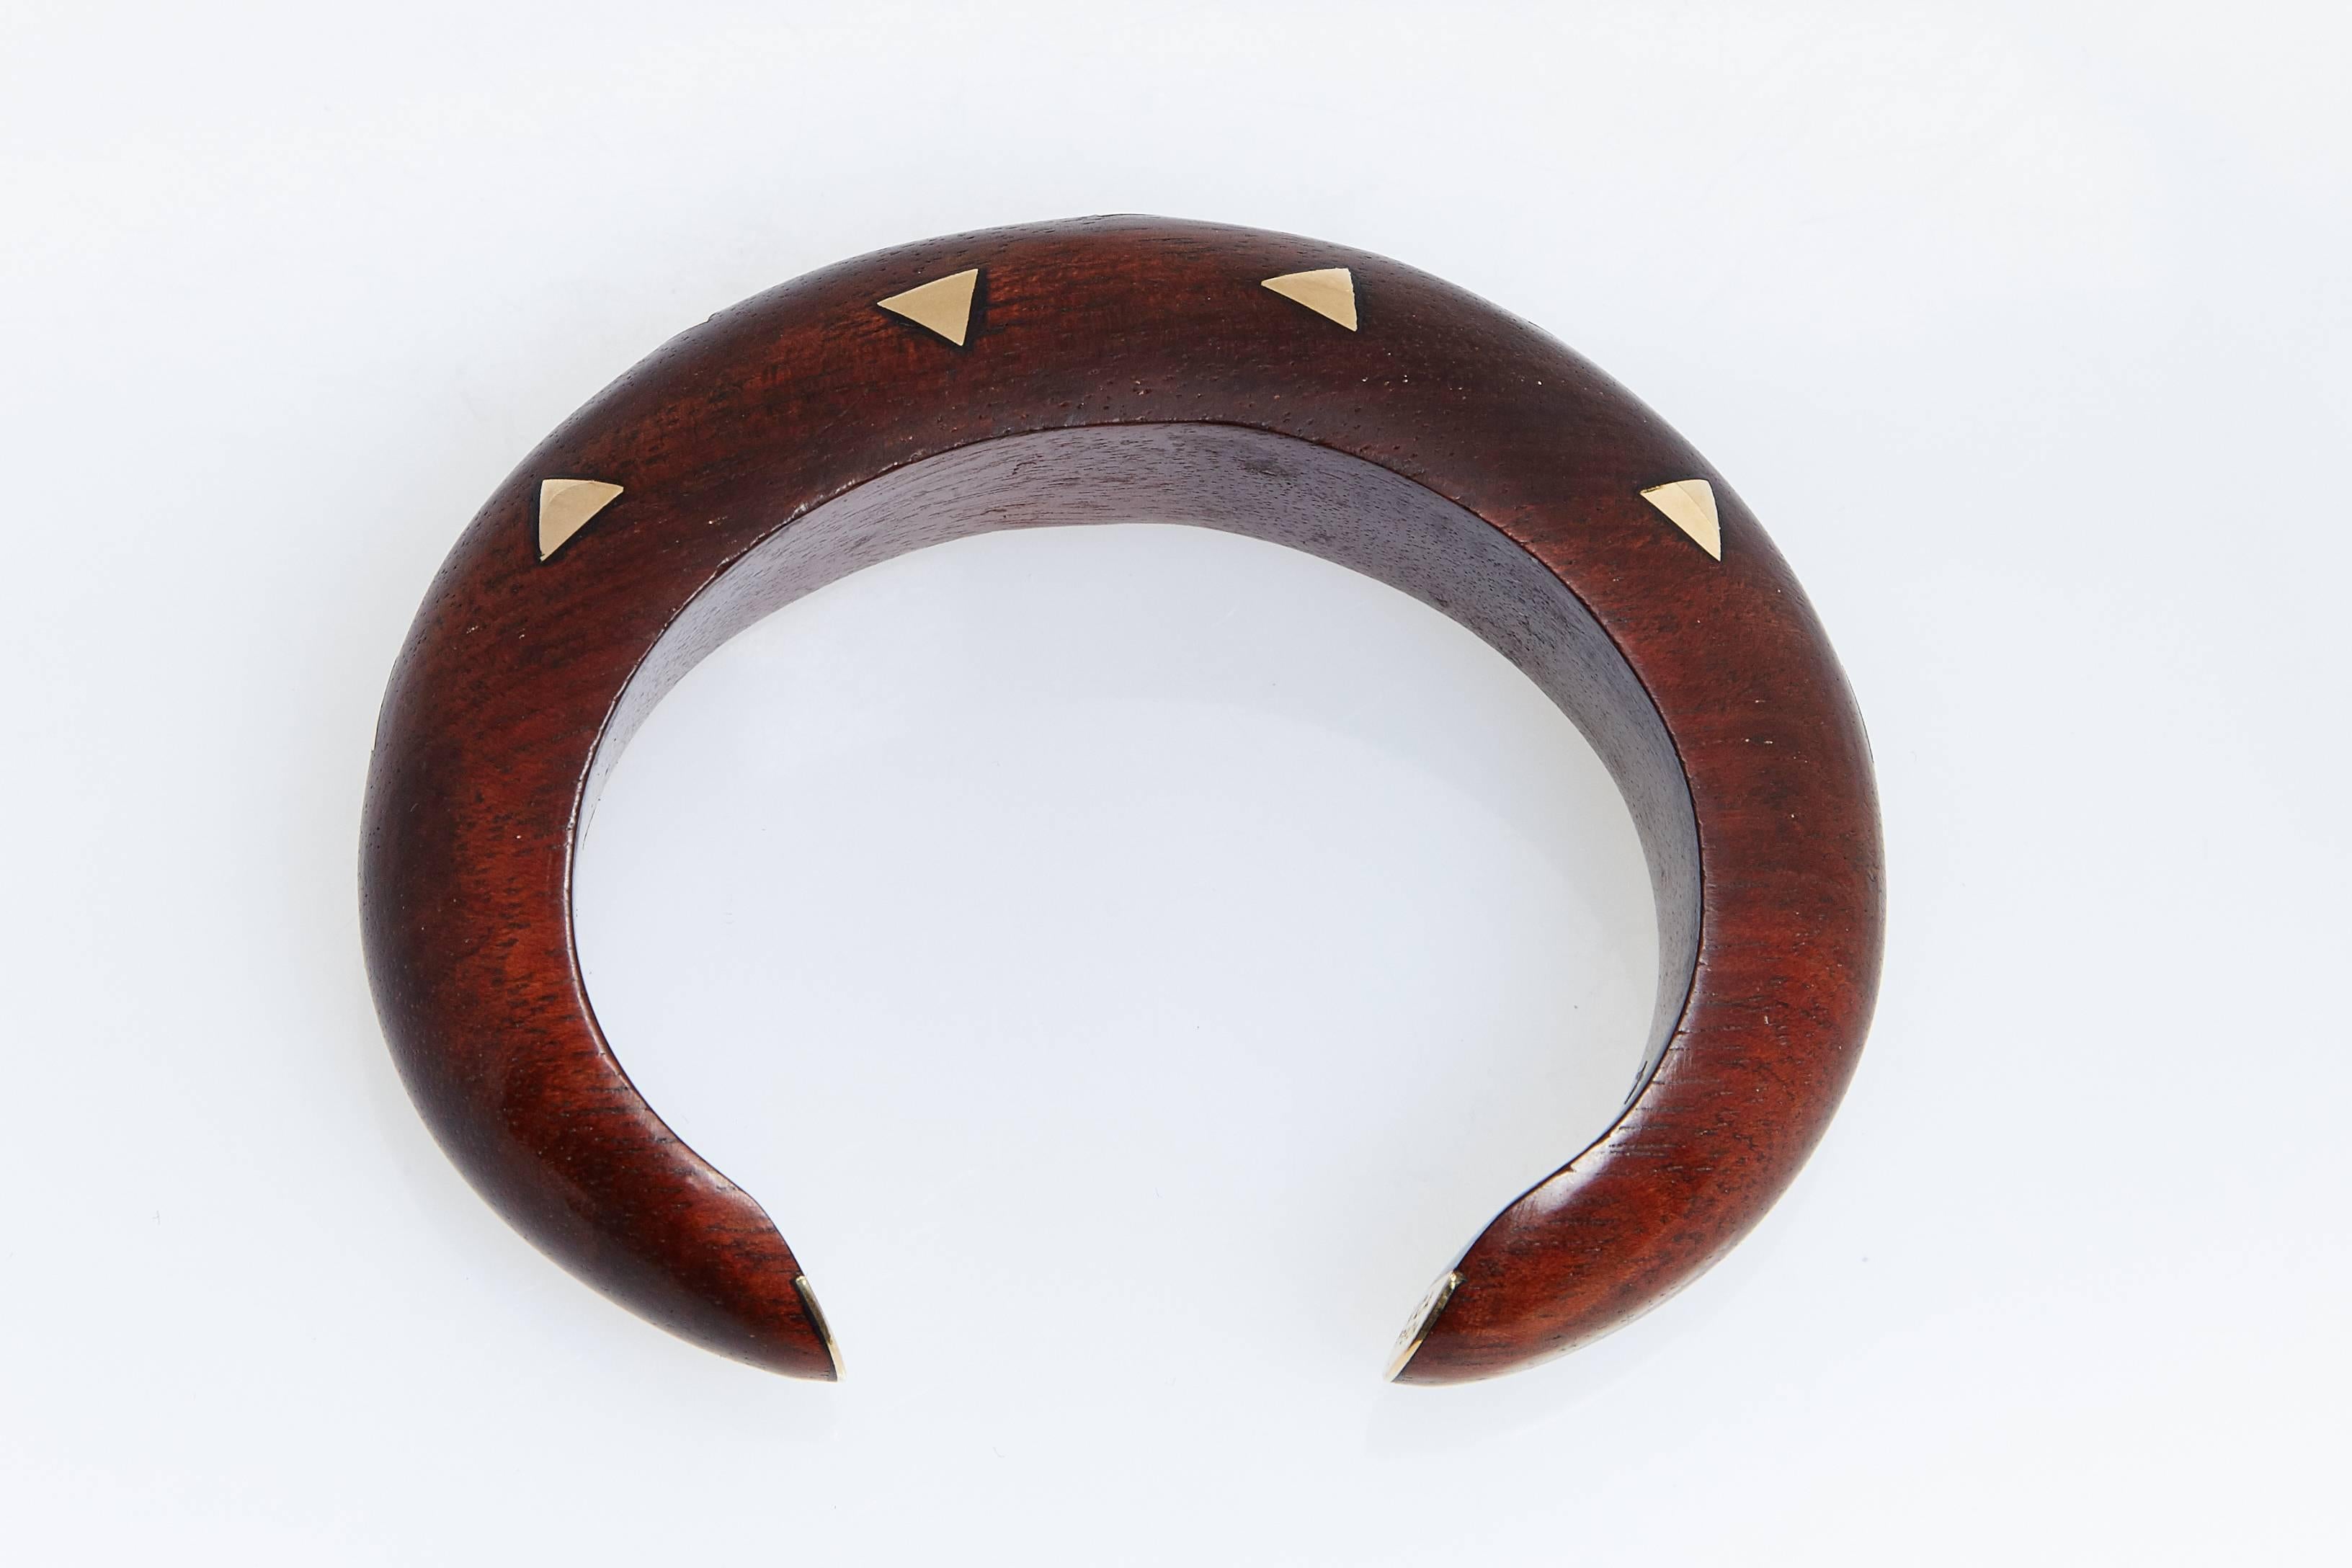      A beautiful rosewood wood and 18 karat yellow gold cuff bracelet by Van Cleef & Arpels.  The  wood is interspersed with gold triangles. The tips are gold and signed "VCA 750" and "B2587 B34".  The bracelet fits is 1 inch